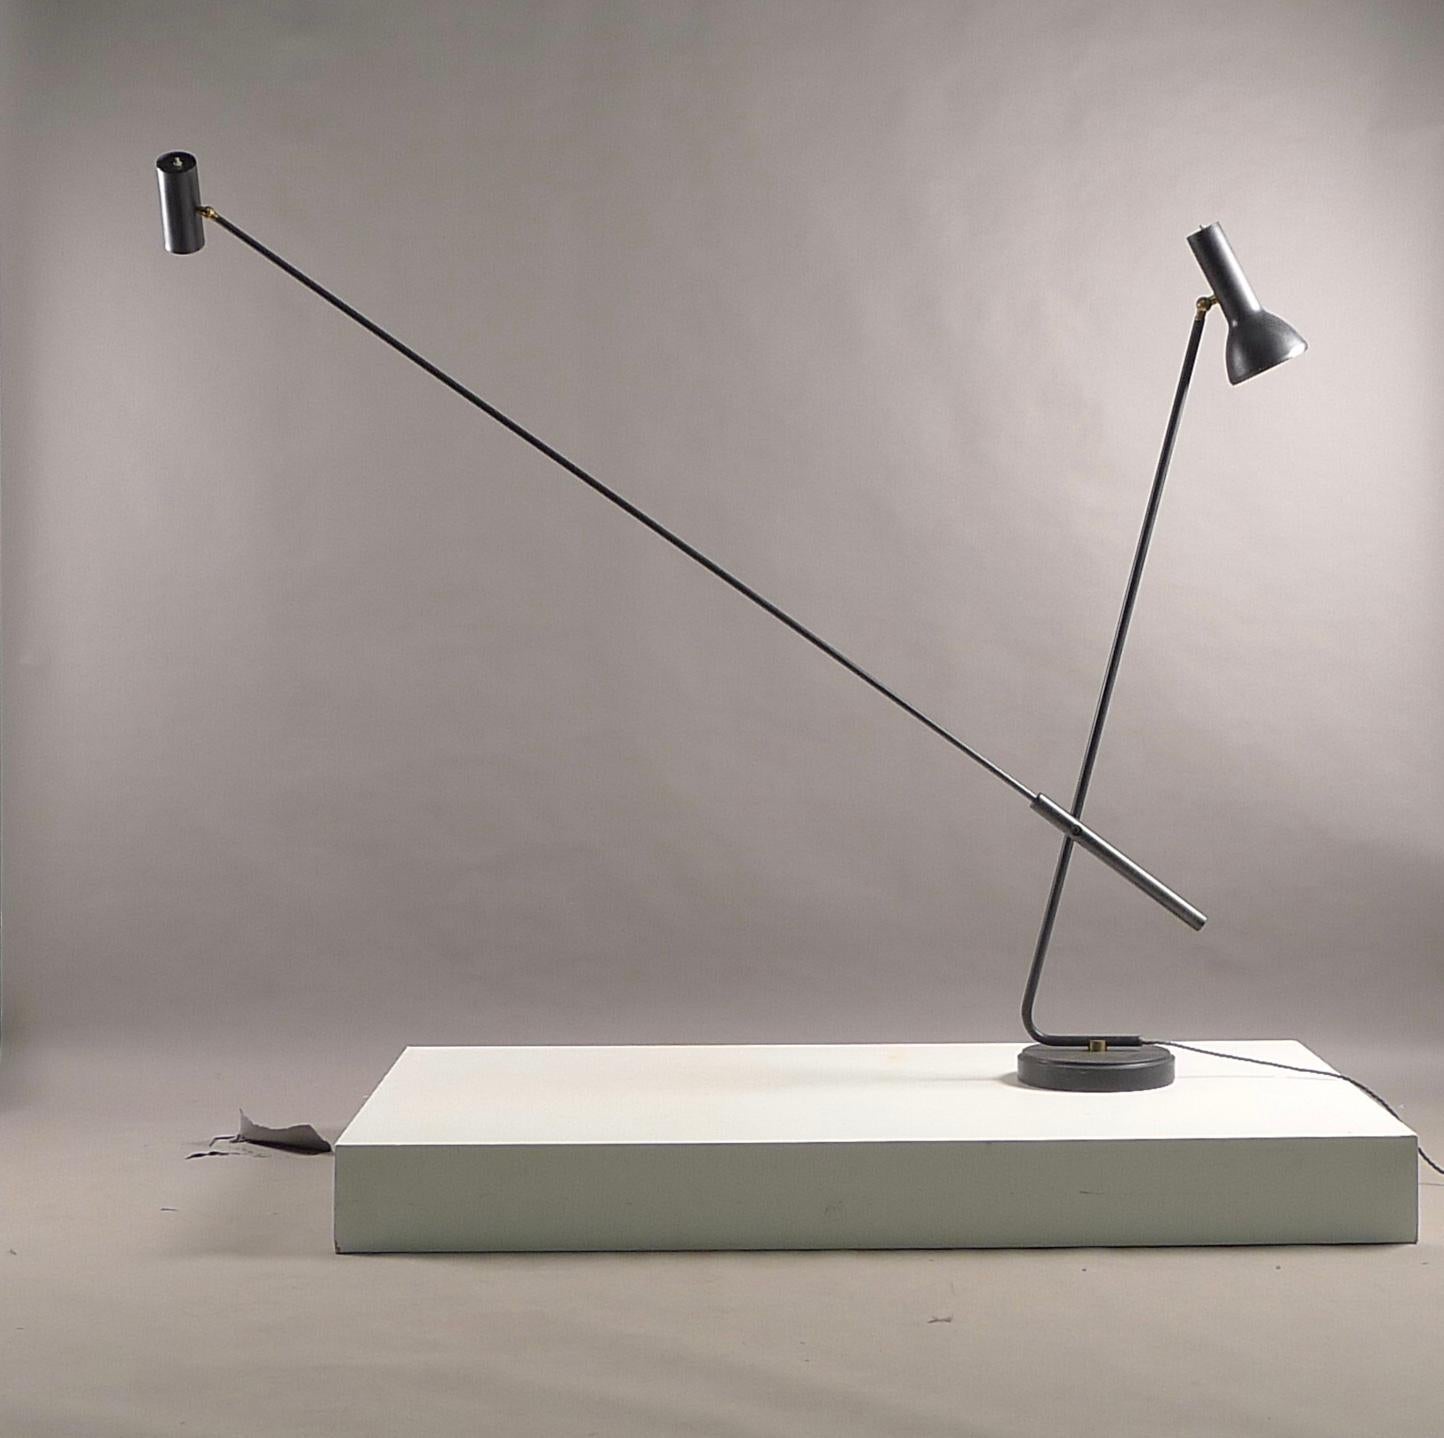 Gino Sarfatti for his own Arteluce Lighting Company, Italy. A 1049/n floor lamp designed circa 1951. Enamelled black aluminium shades are multi directional, supported by two arms, the longer of which also pivots through the axis. All supported by a